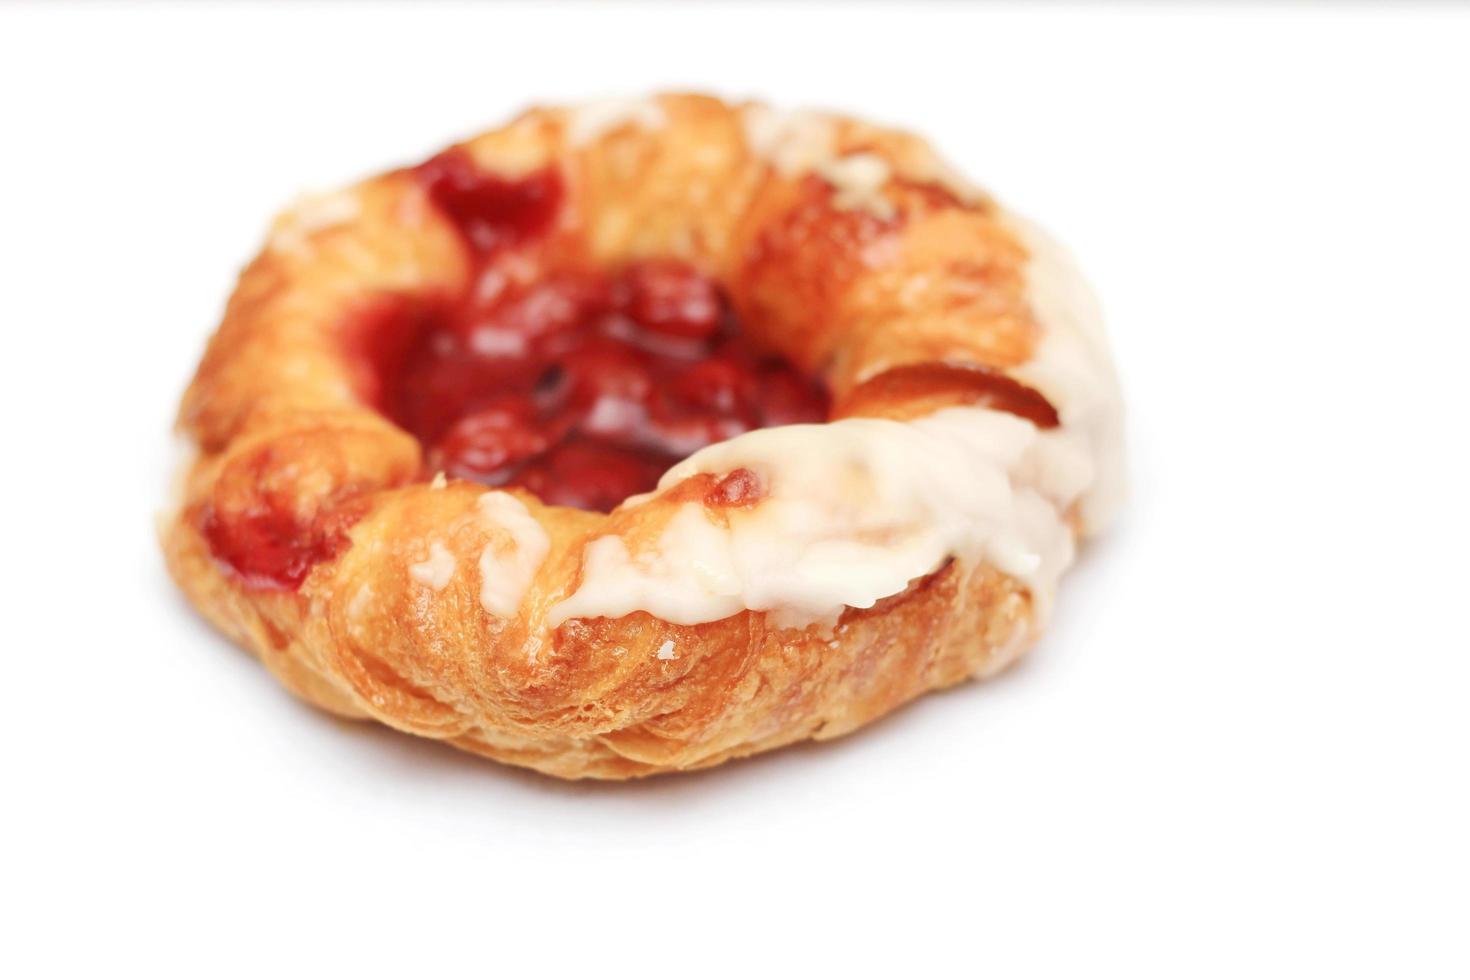 Cherry filled Danish or Danish bread placed on a white background. photo